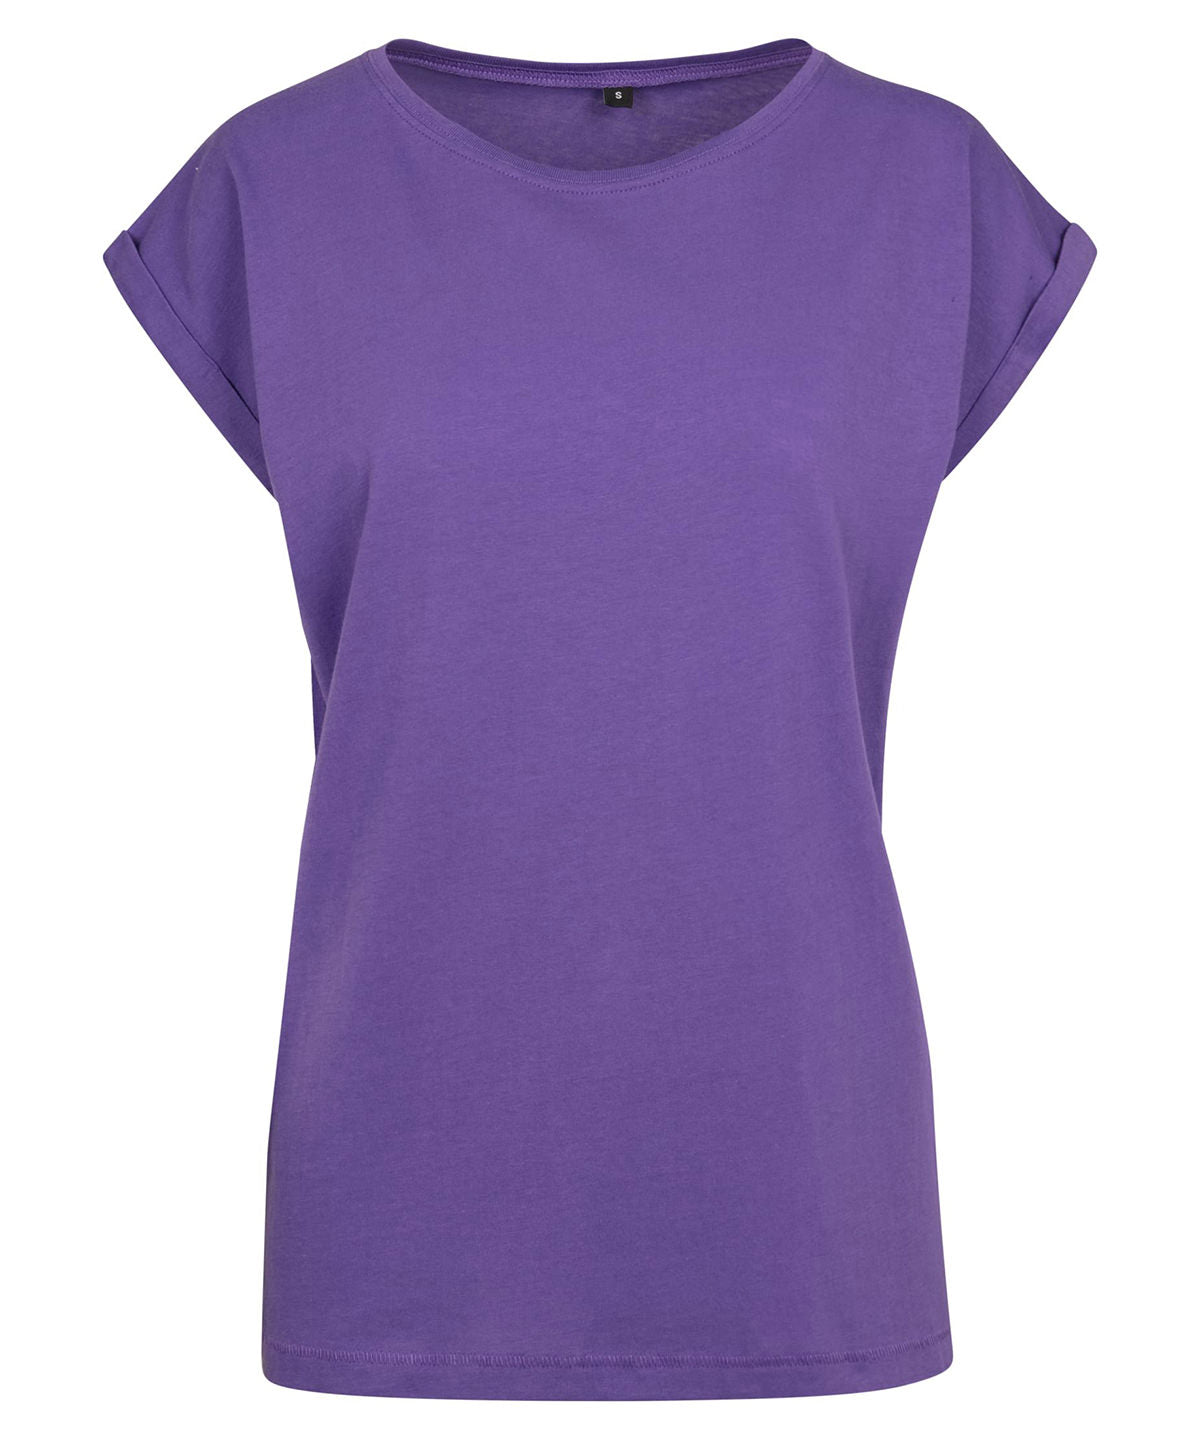 Build Your Brand Womens Extended Shoulder Tee Ultra Violet